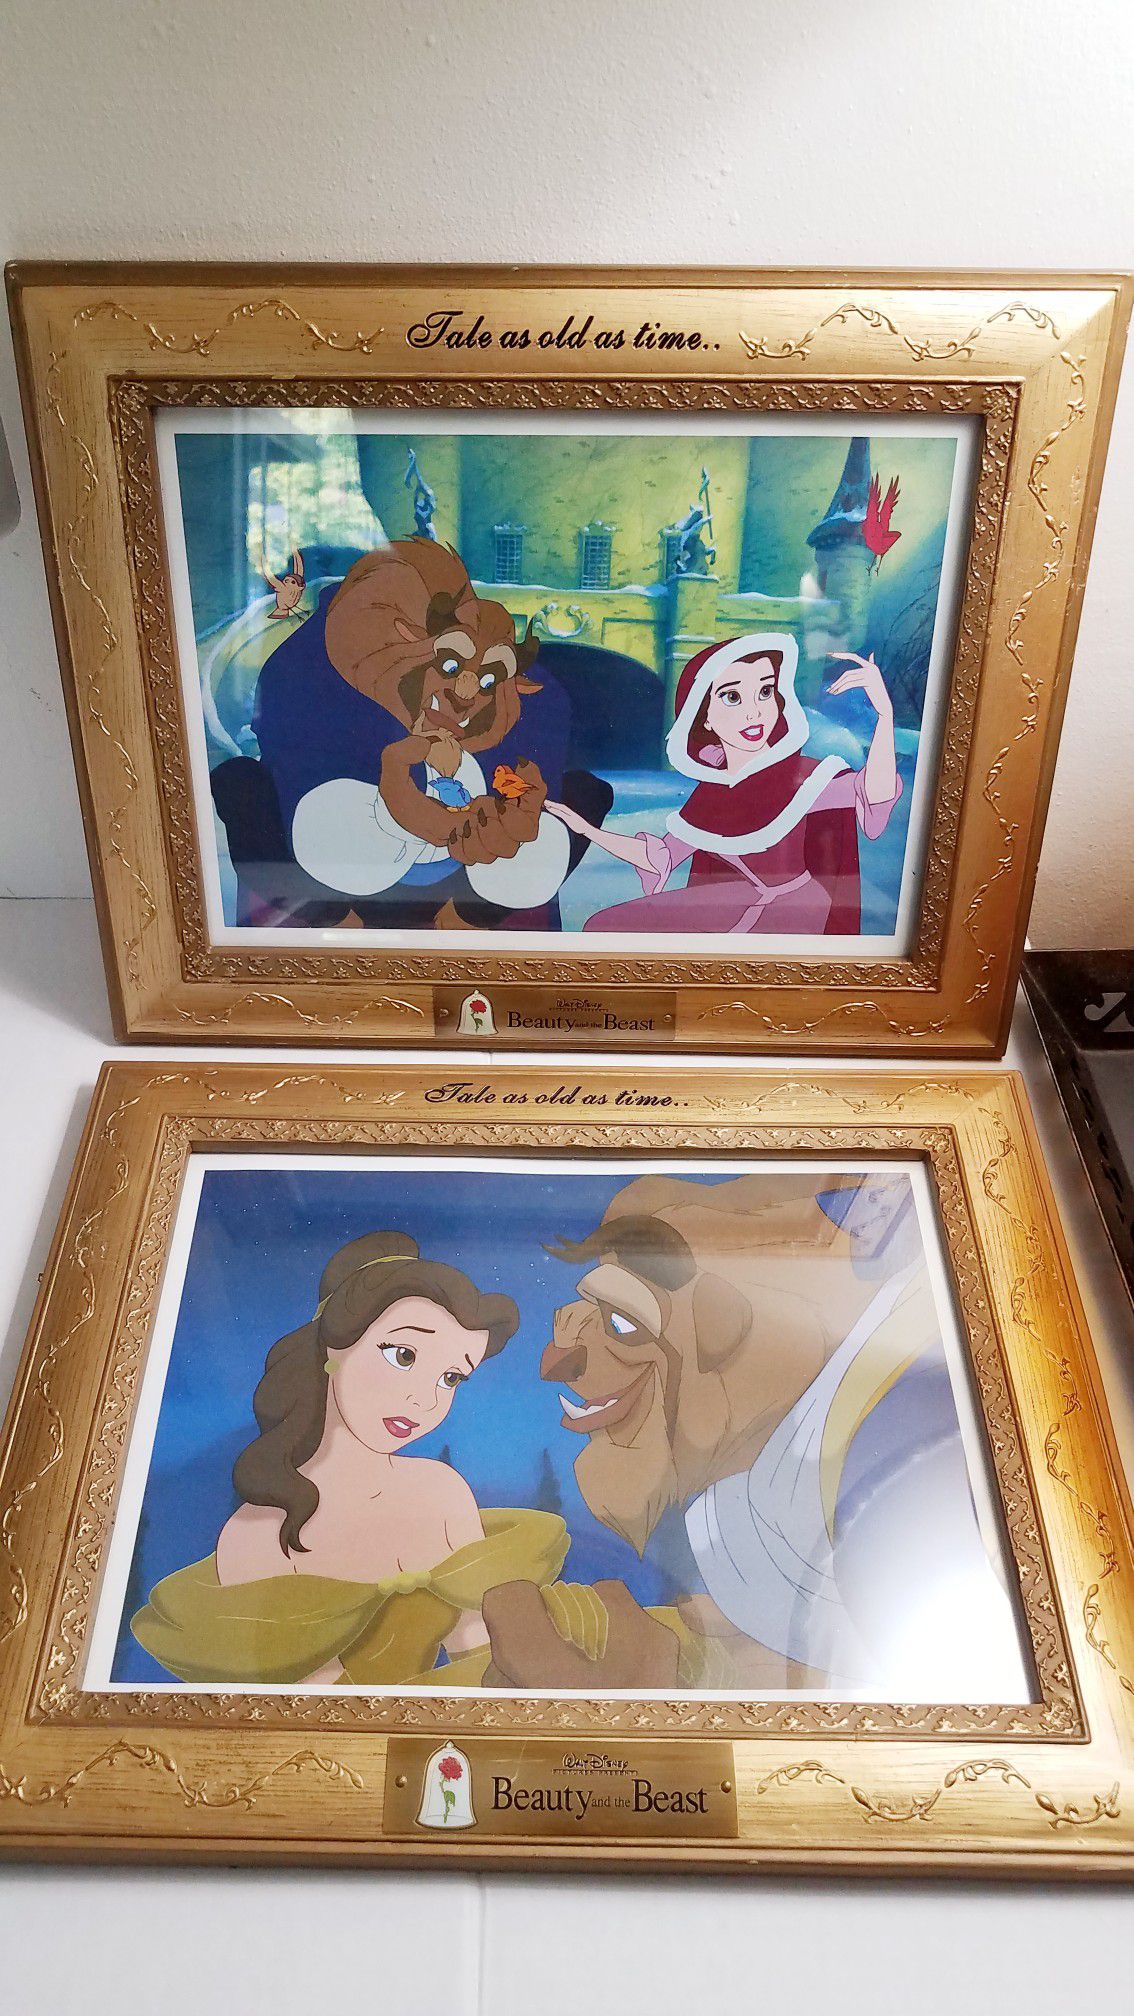 2 Disney/ Beauty & the beast framed pictures